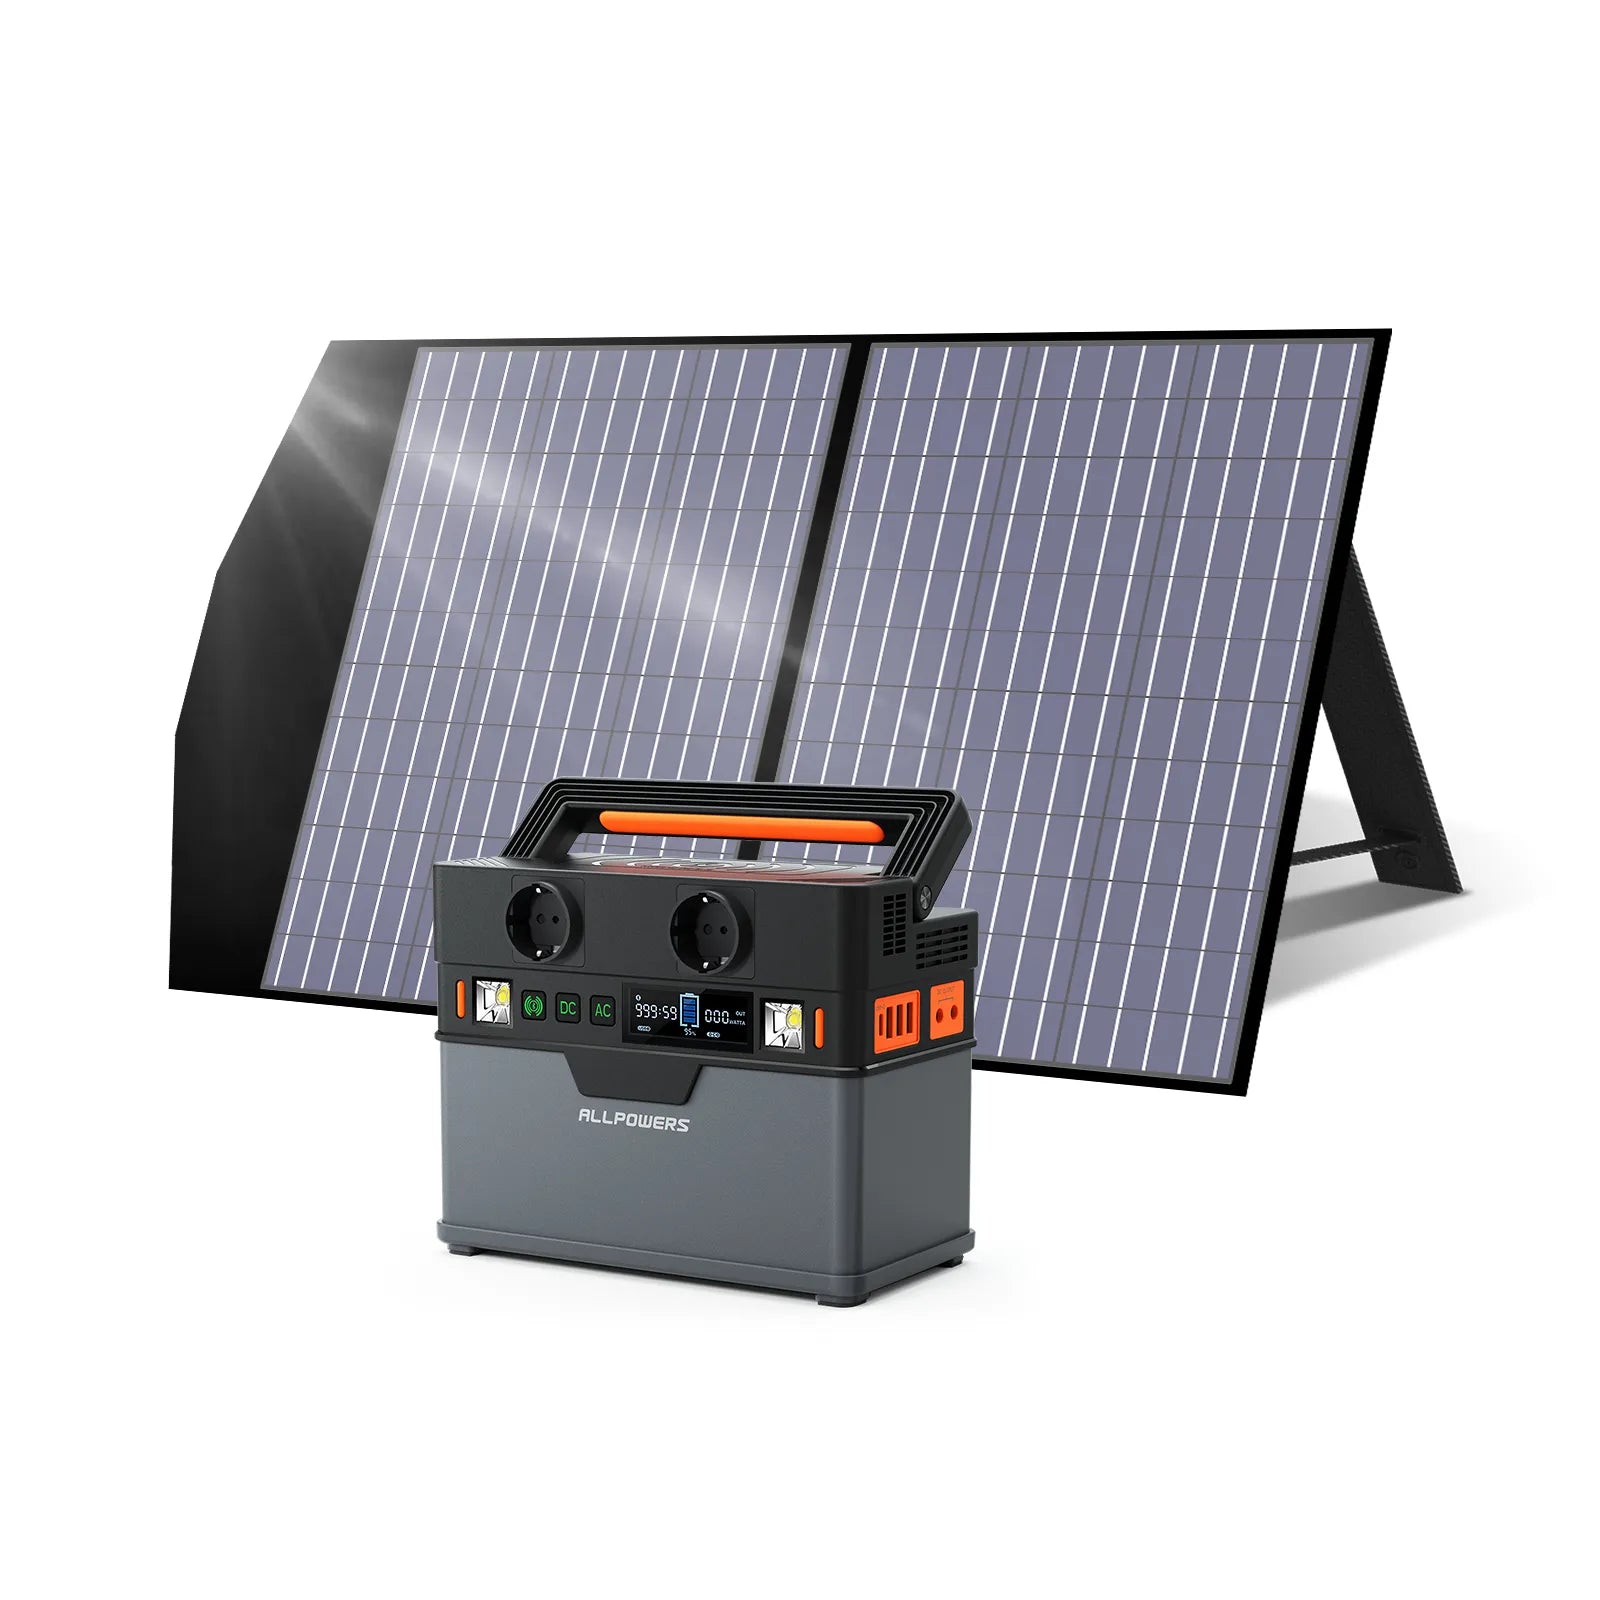 ALLPOWERS S300 Solar Generator Portable Power Station 300W 288Wh with SP027 100W Solar Panels